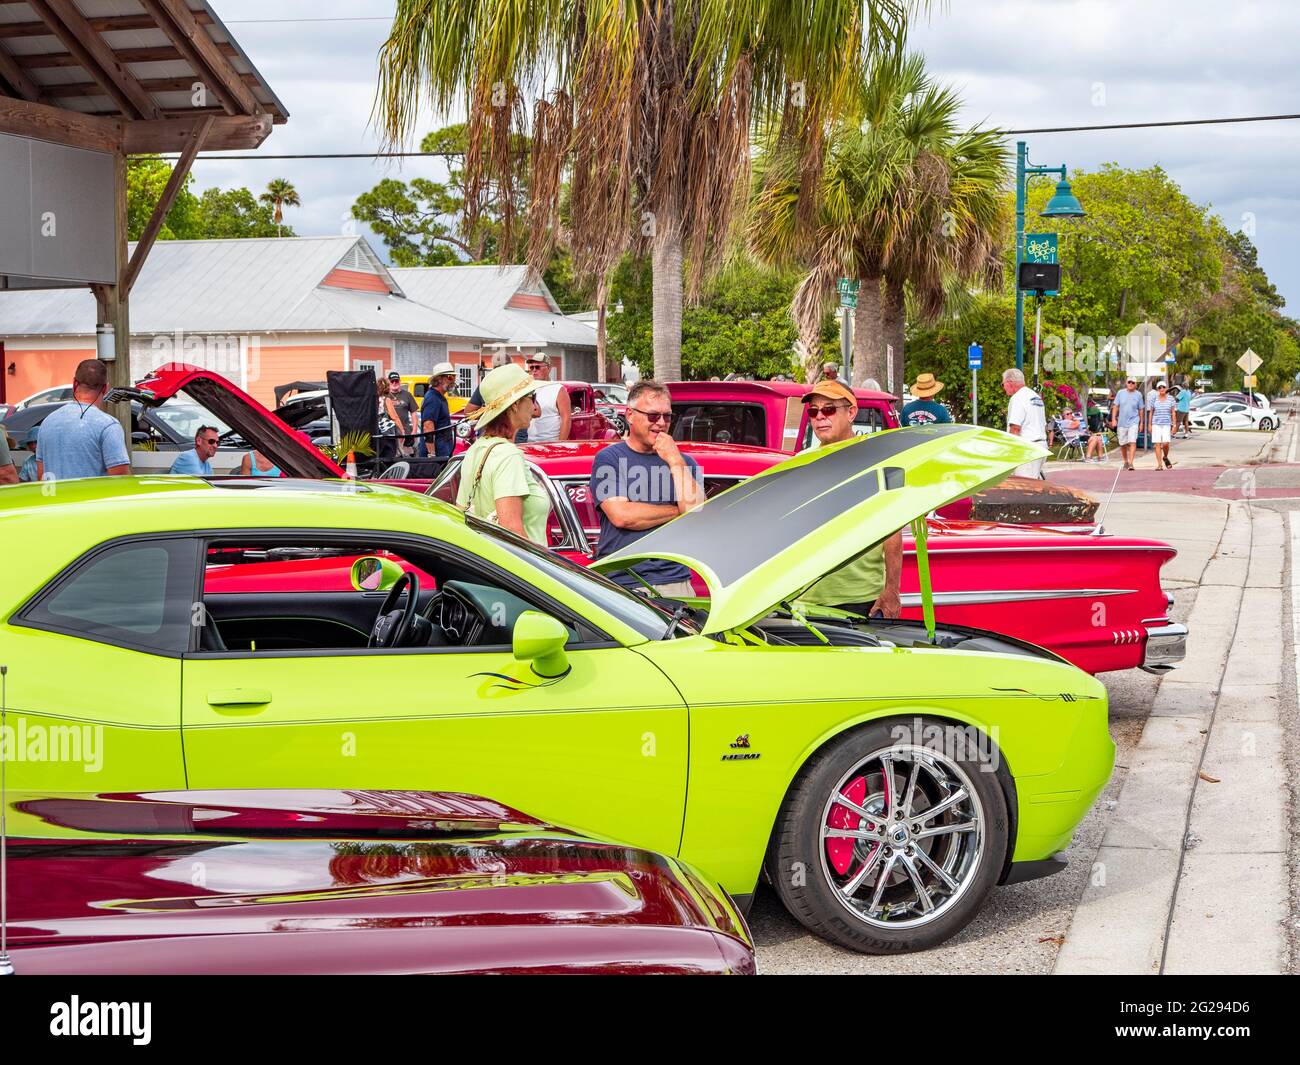 Cruisin’ on Dearborn monthly car show on Dearborn Street in Englewood Florida USA Stock Photo